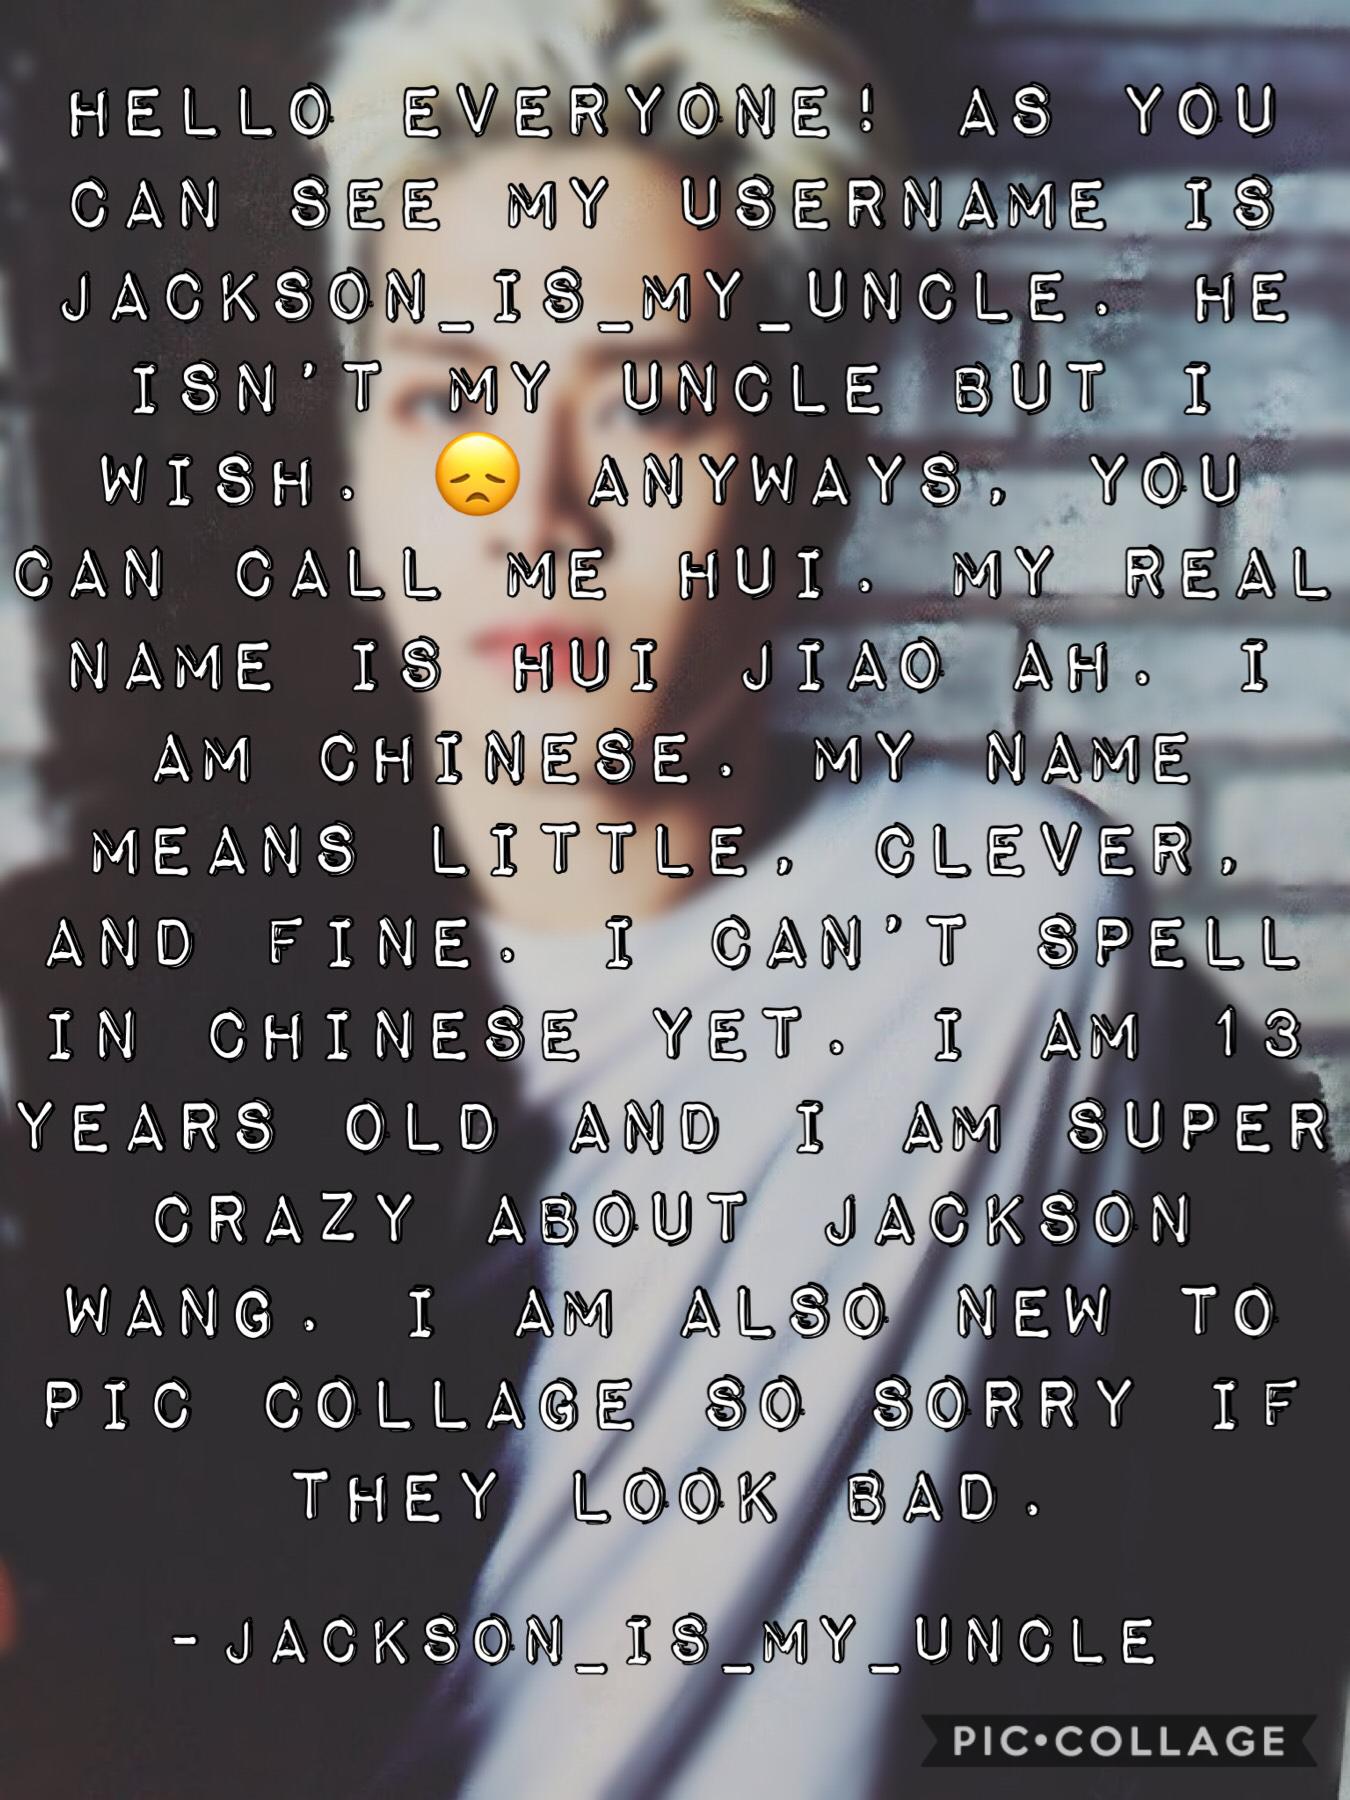 Collage by JACKSON_IS_MY_UNCLE